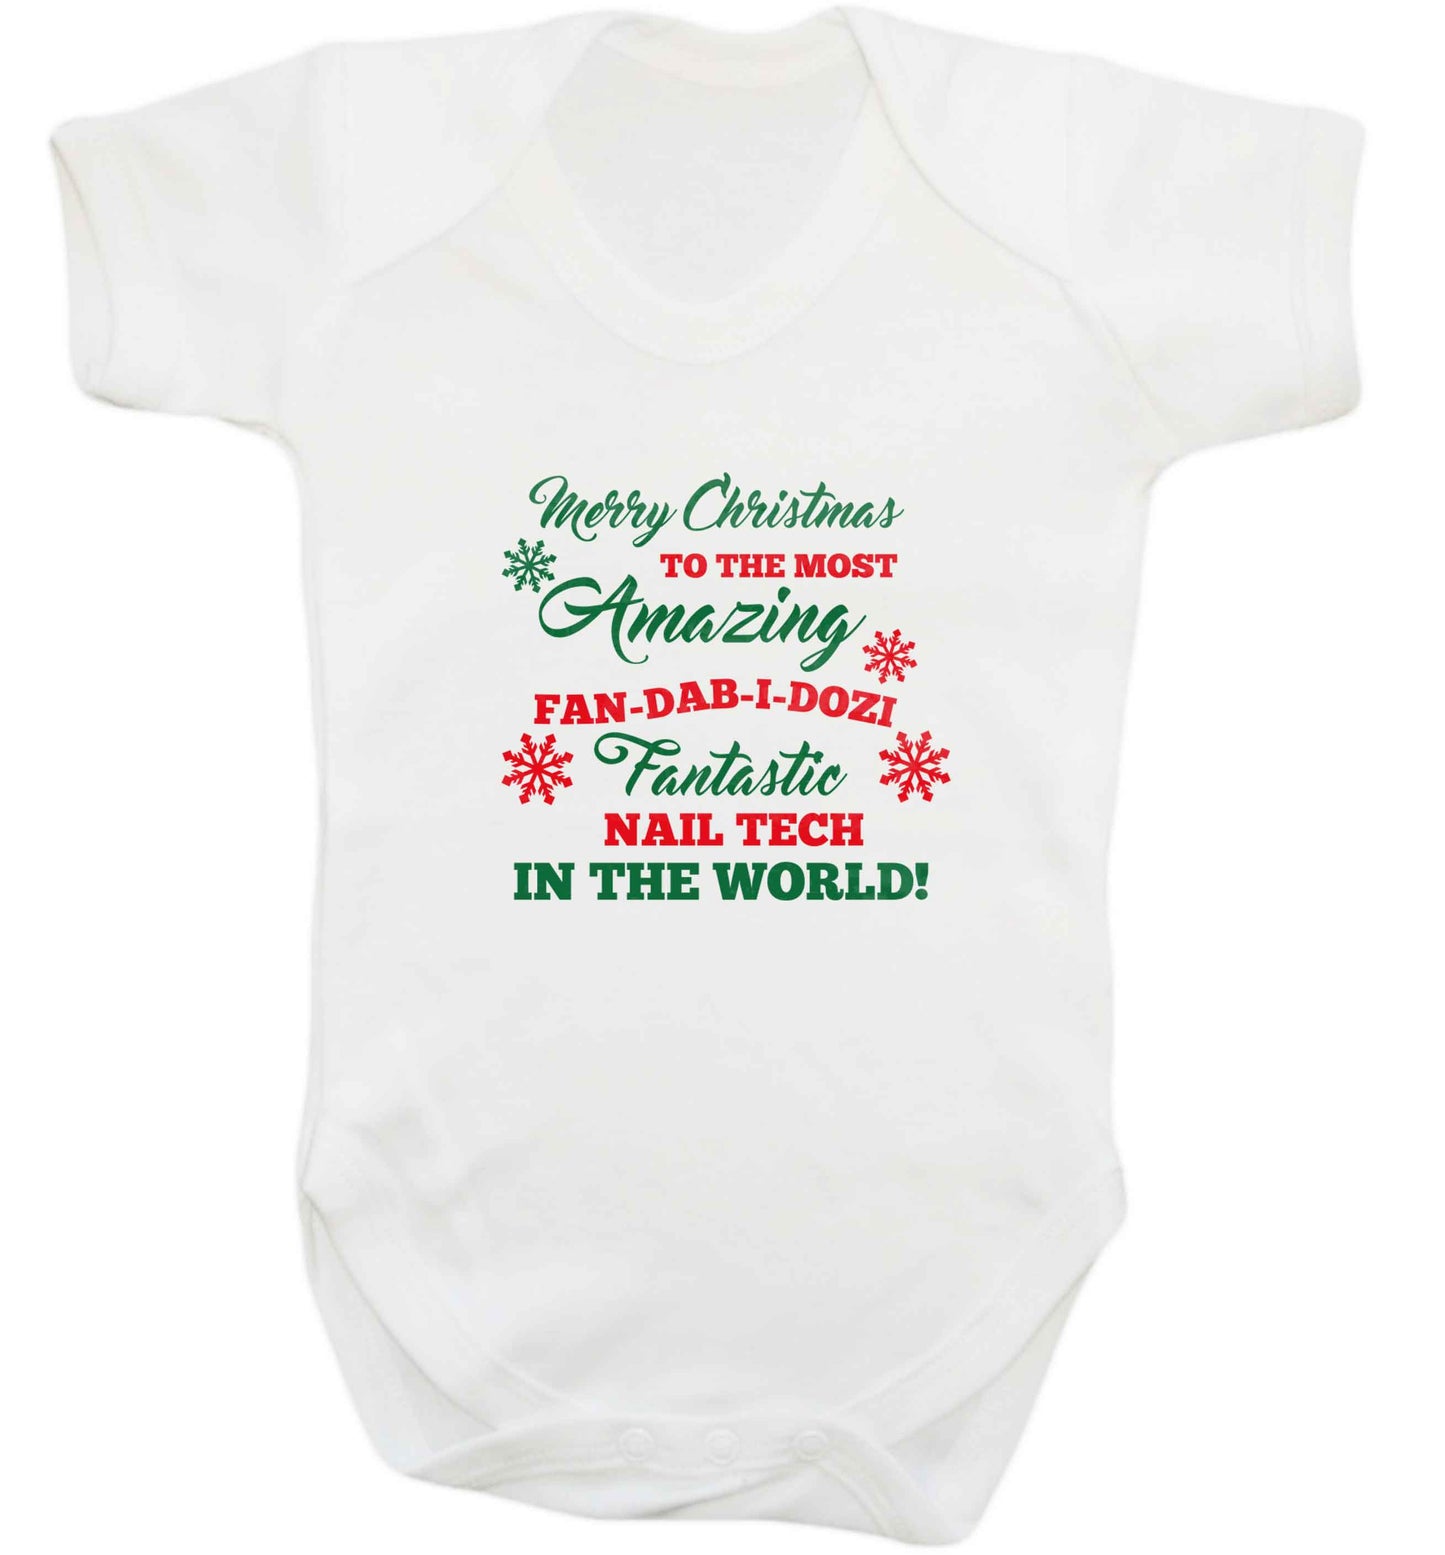 Merry Christmas to the most amazing fan-dab-i-dozi fantasic nail technician in the world baby vest white 18-24 months